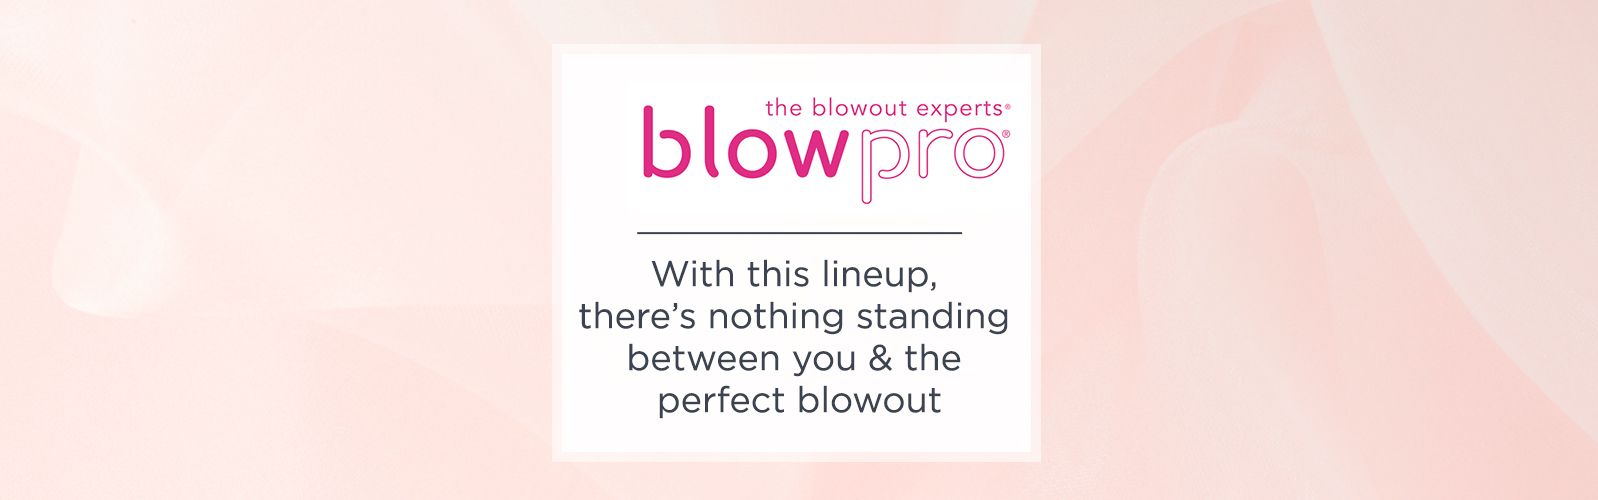 blowpro With this lineup, there's nothing standing between you & the perfect blowout